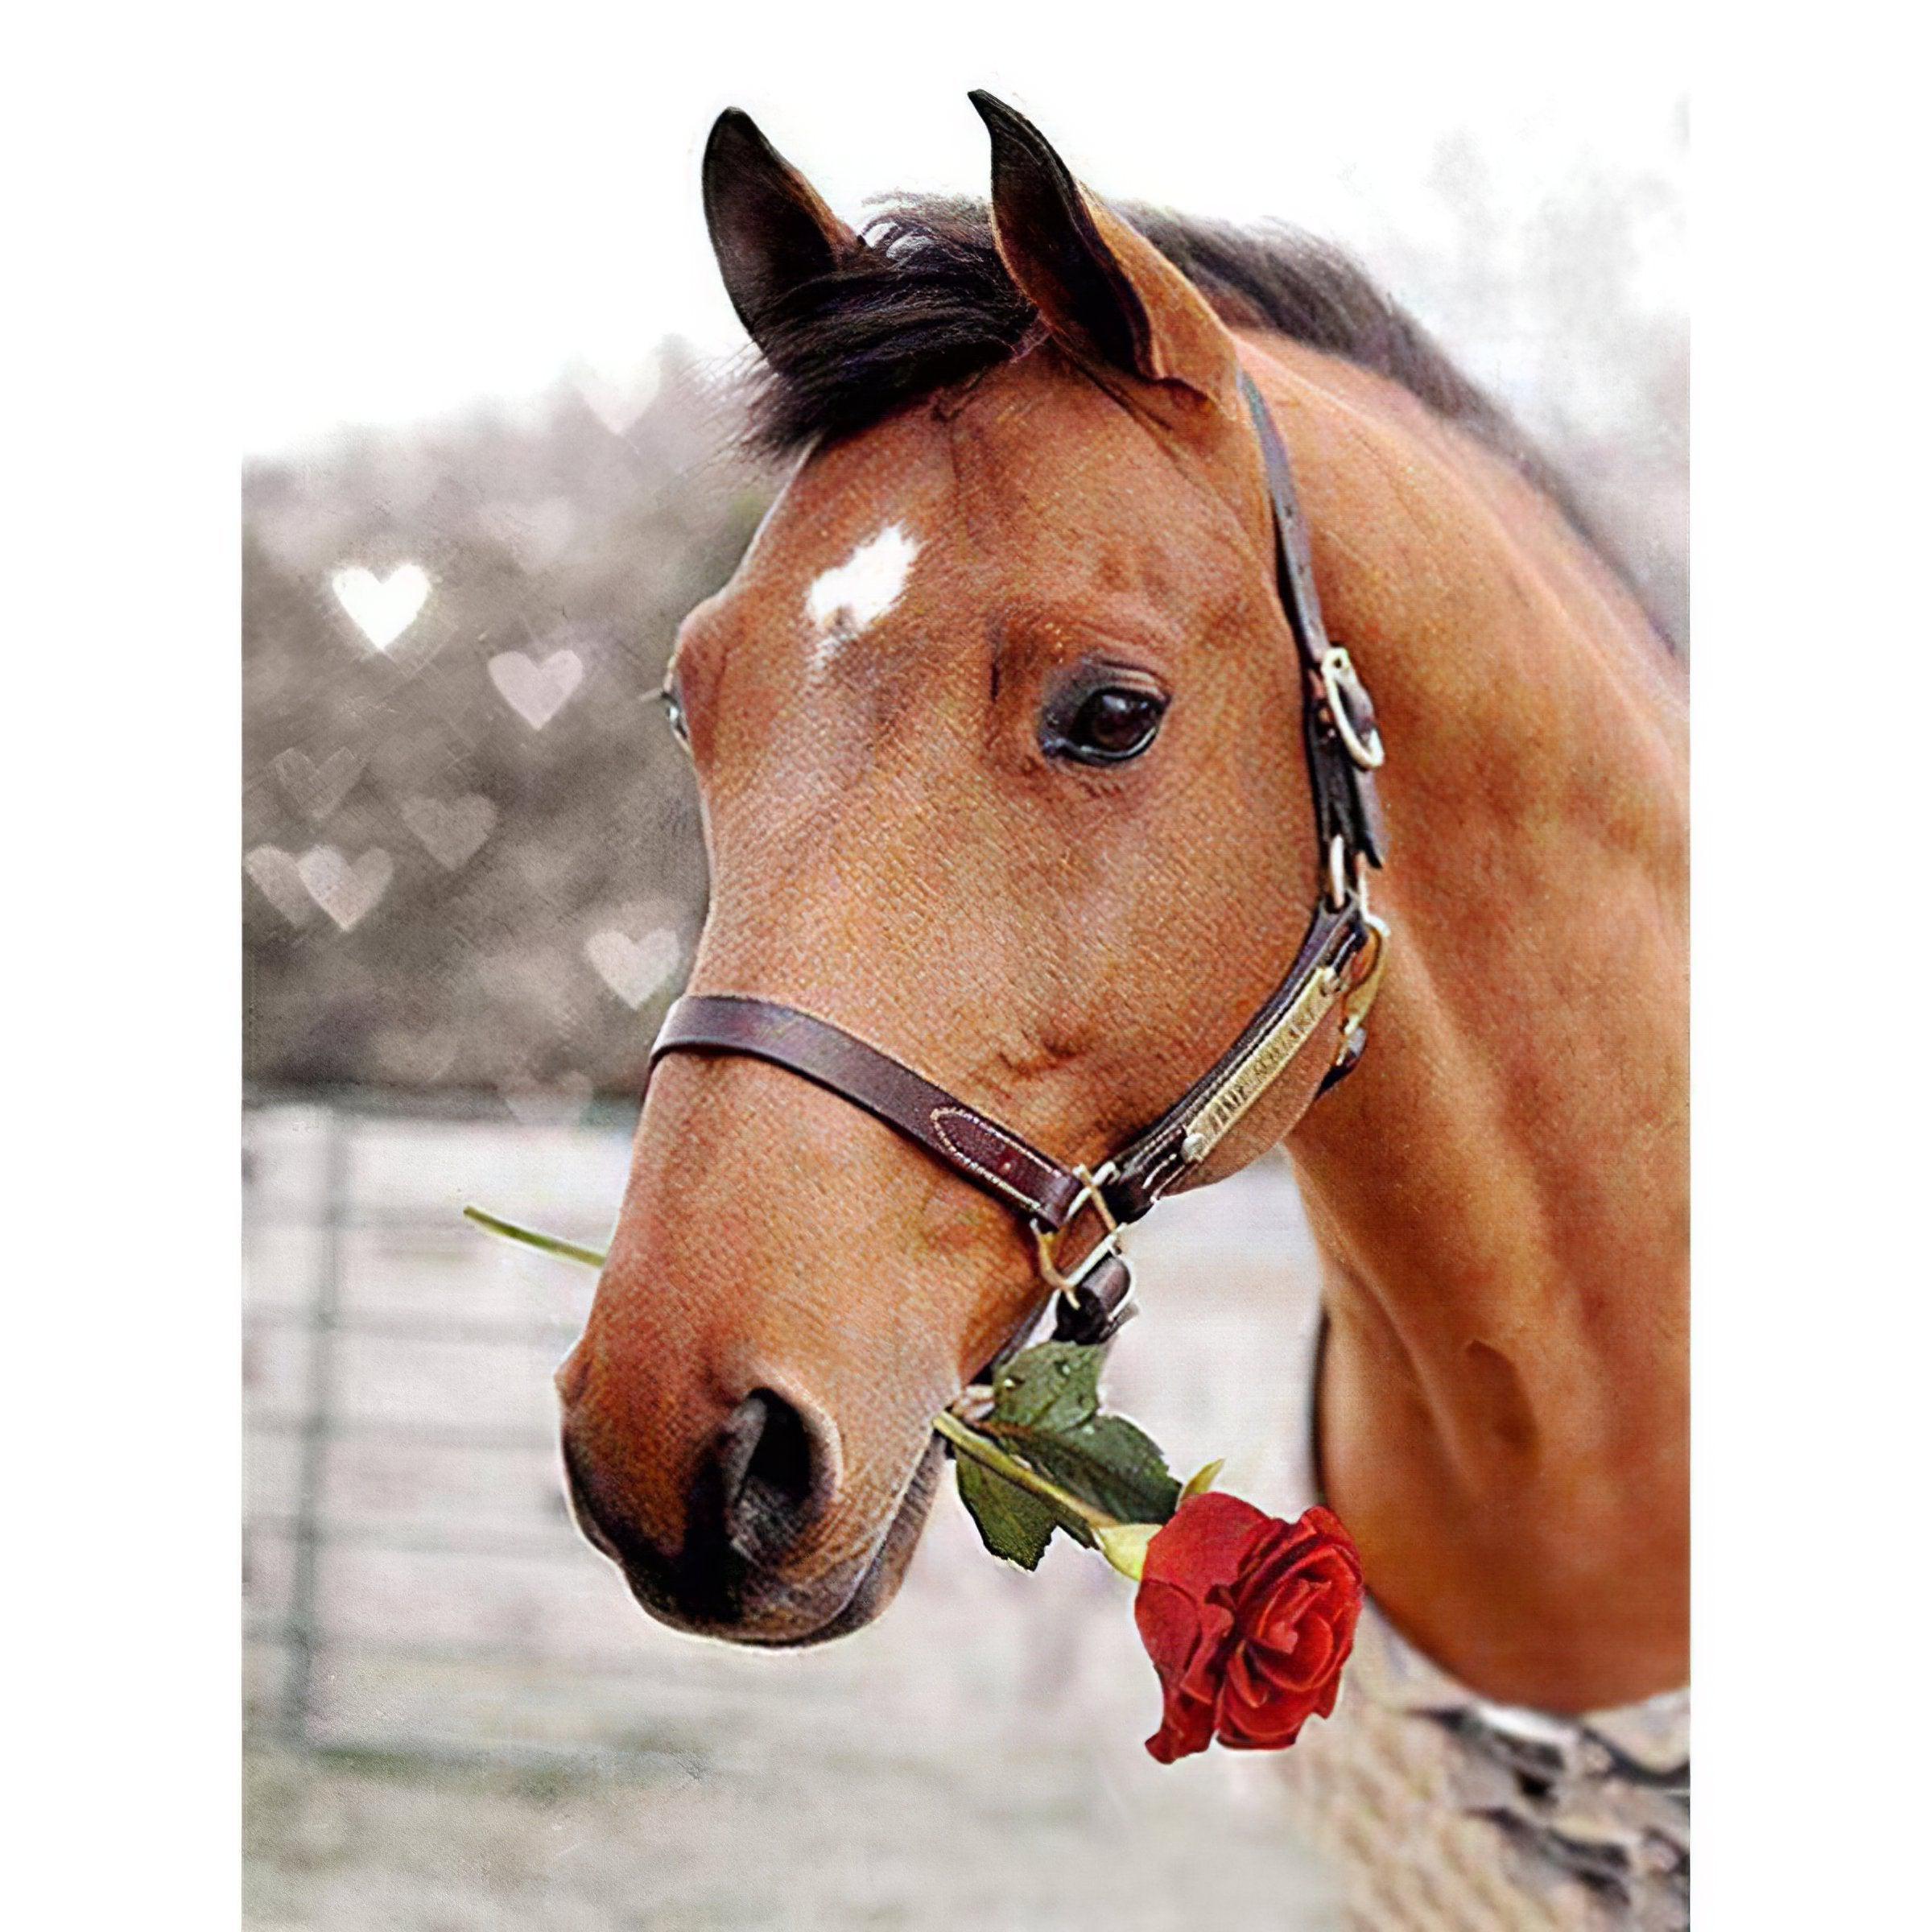 Horse With Rose In The Mouth